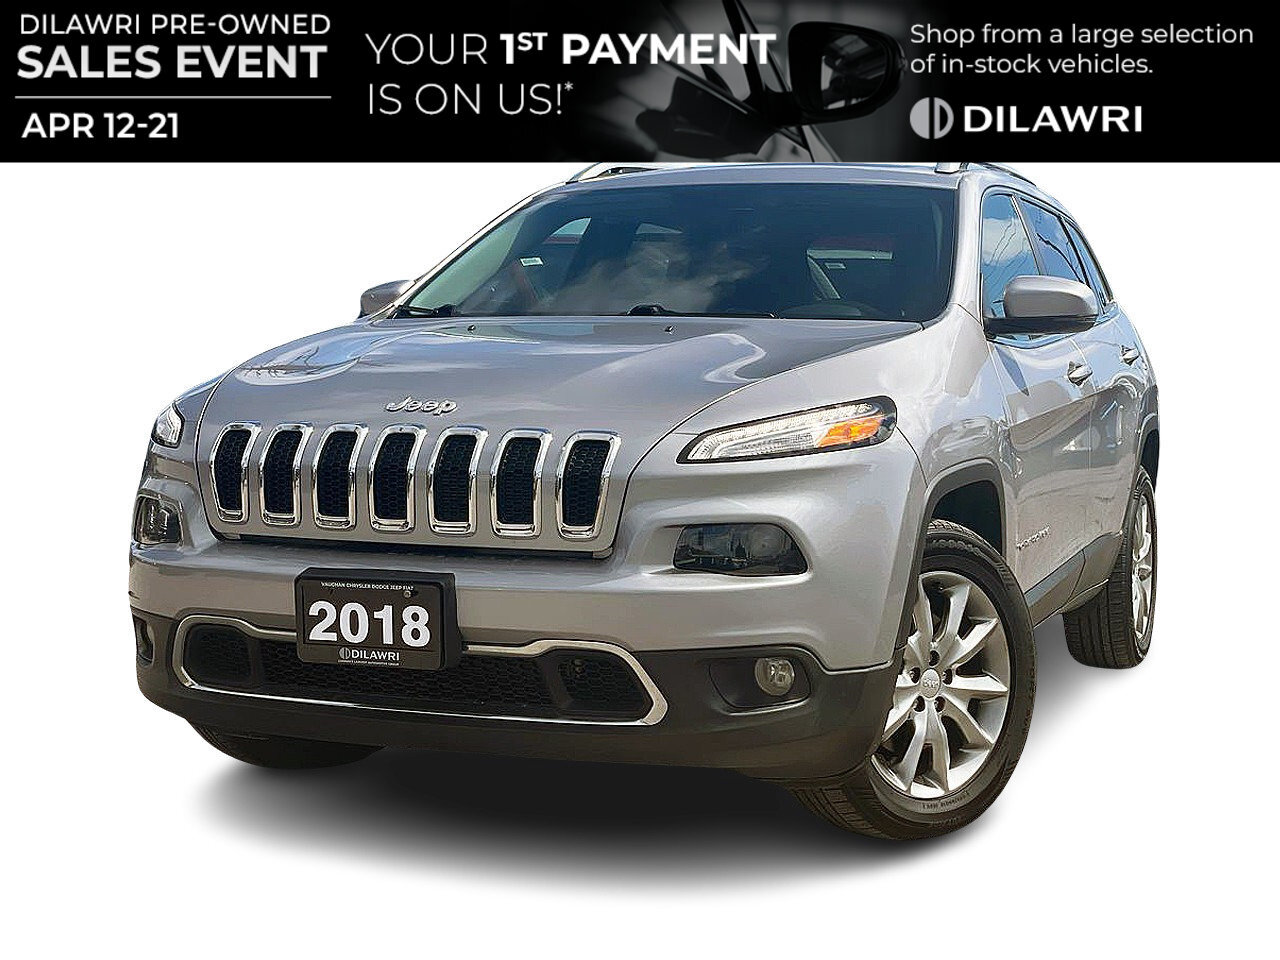 2018 Jeep Cherokee 4x4 Limited 1 Owner | Leather Seats | Clean Carfax